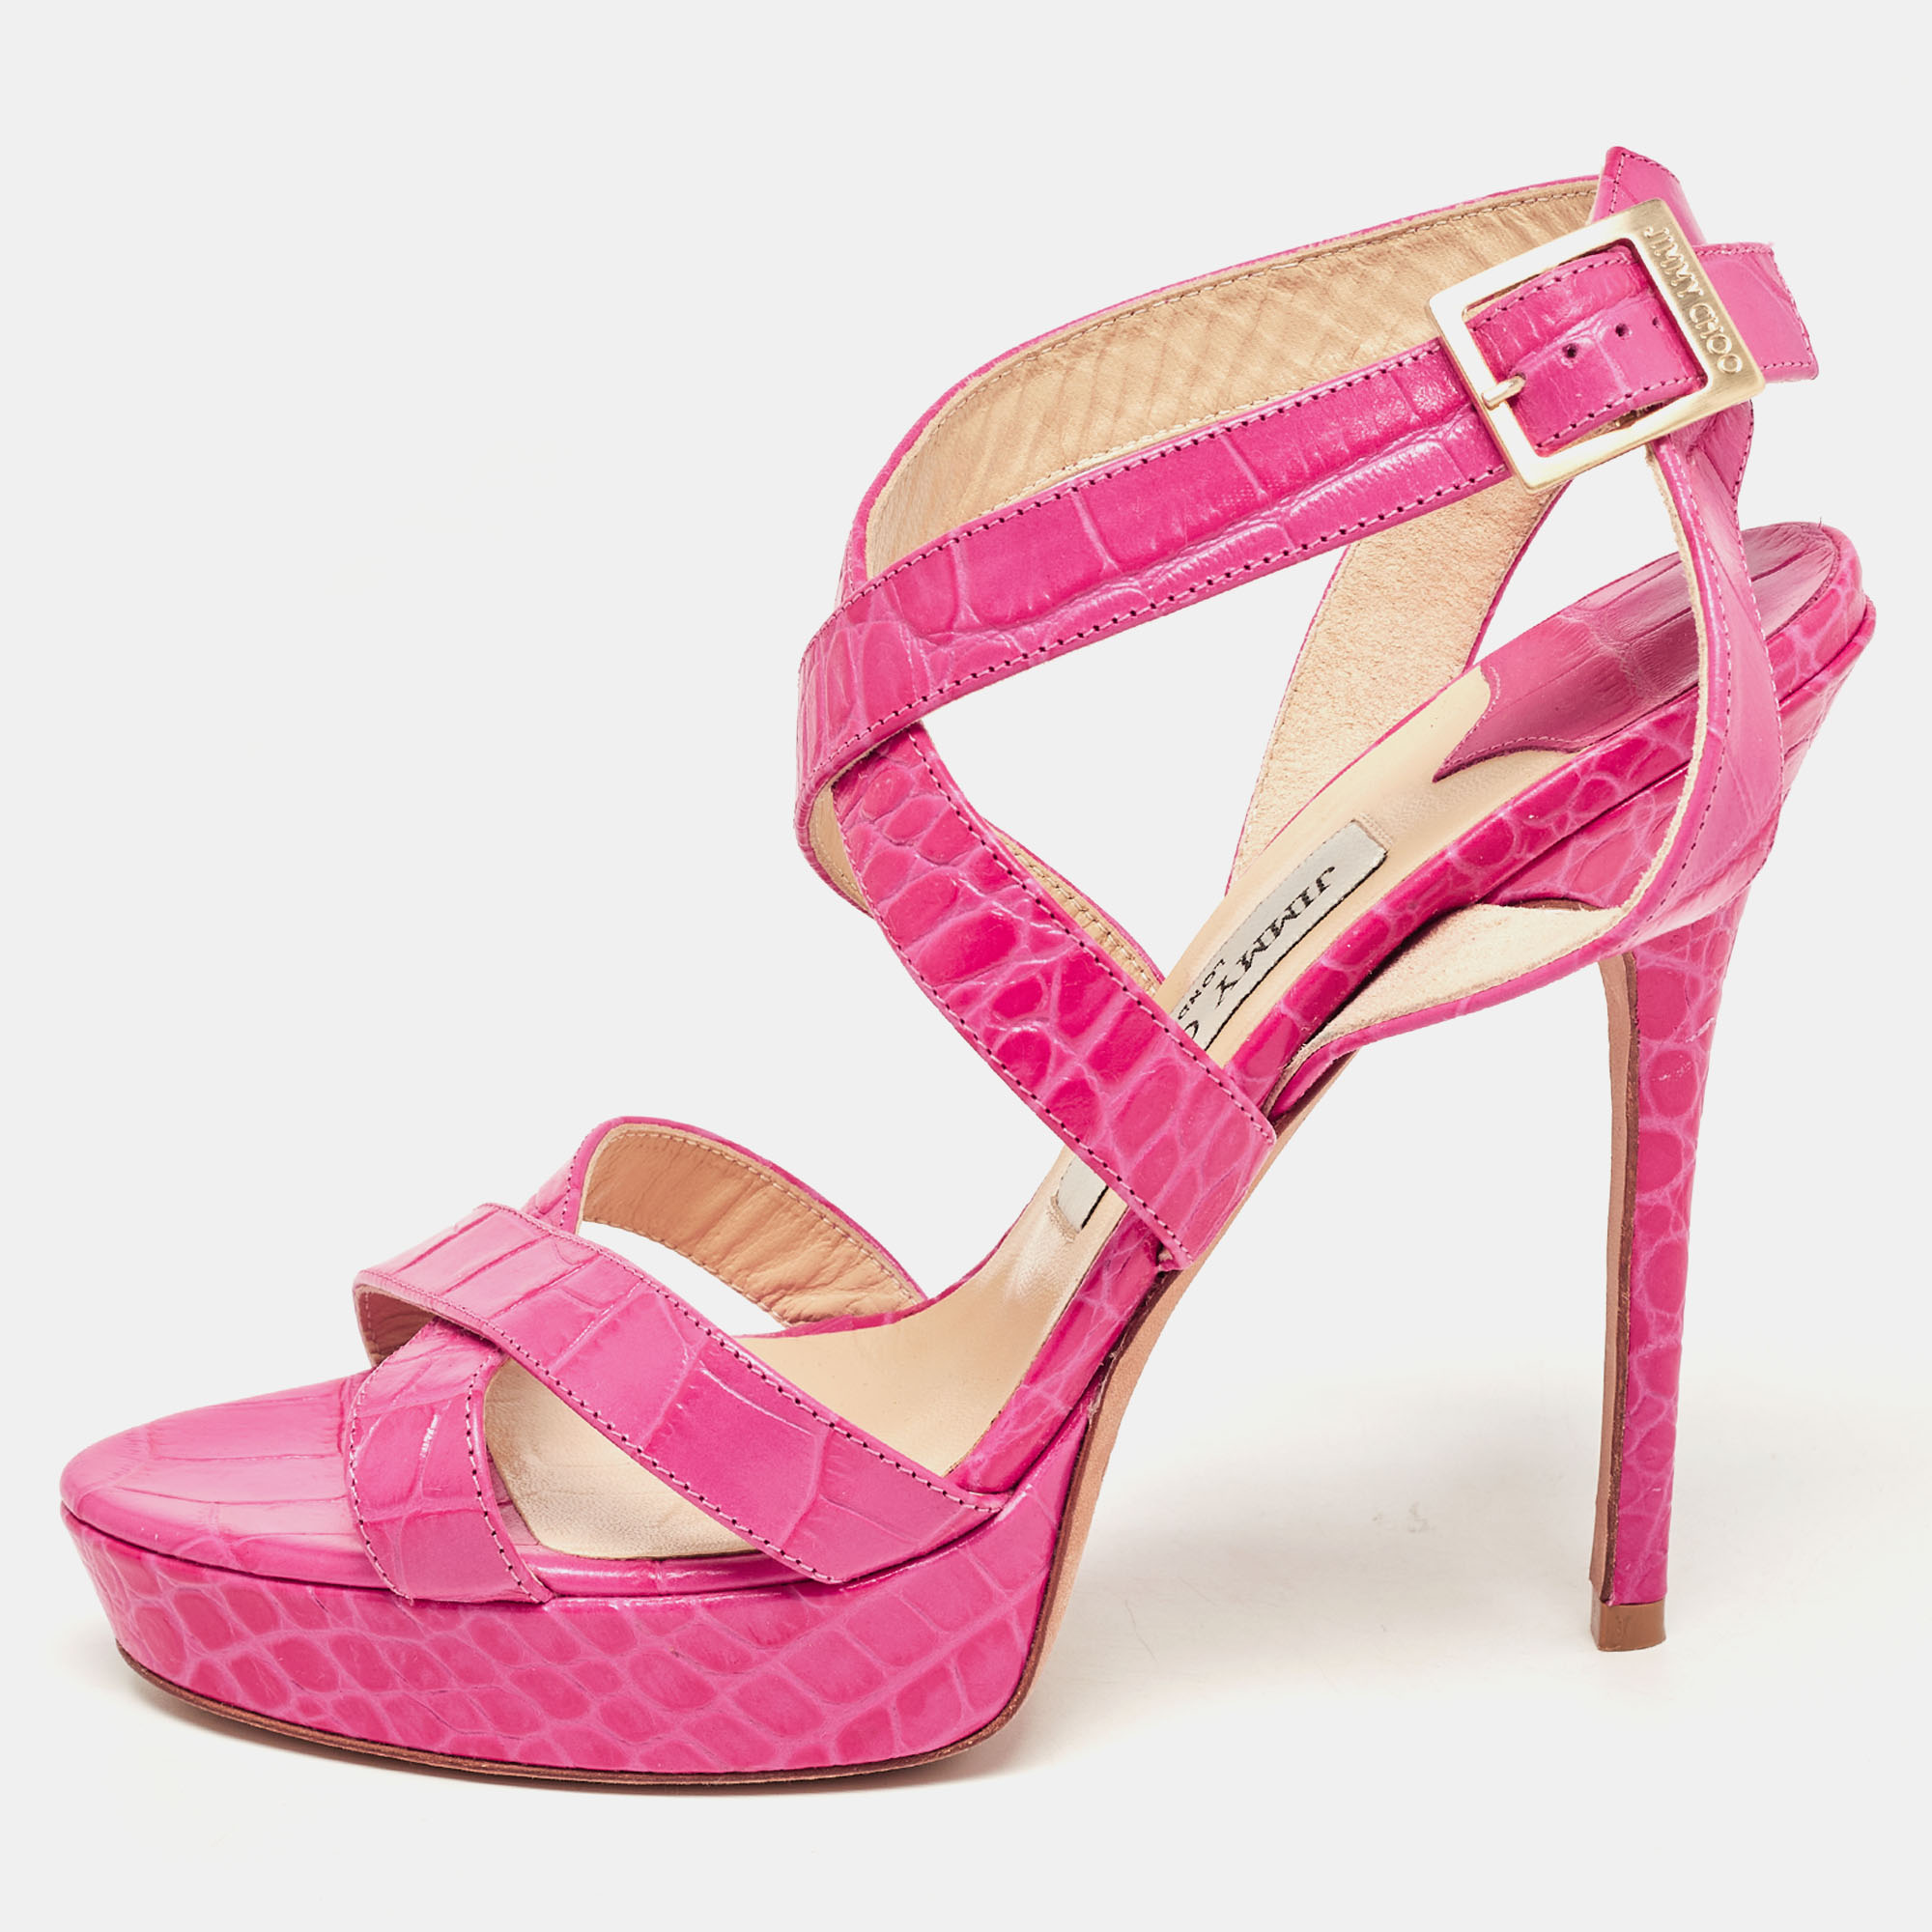 Pre-owned Jimmy Choo Pink Croc Embossed Leather Strappy Lottie Ankle Strap Sandals Size 39